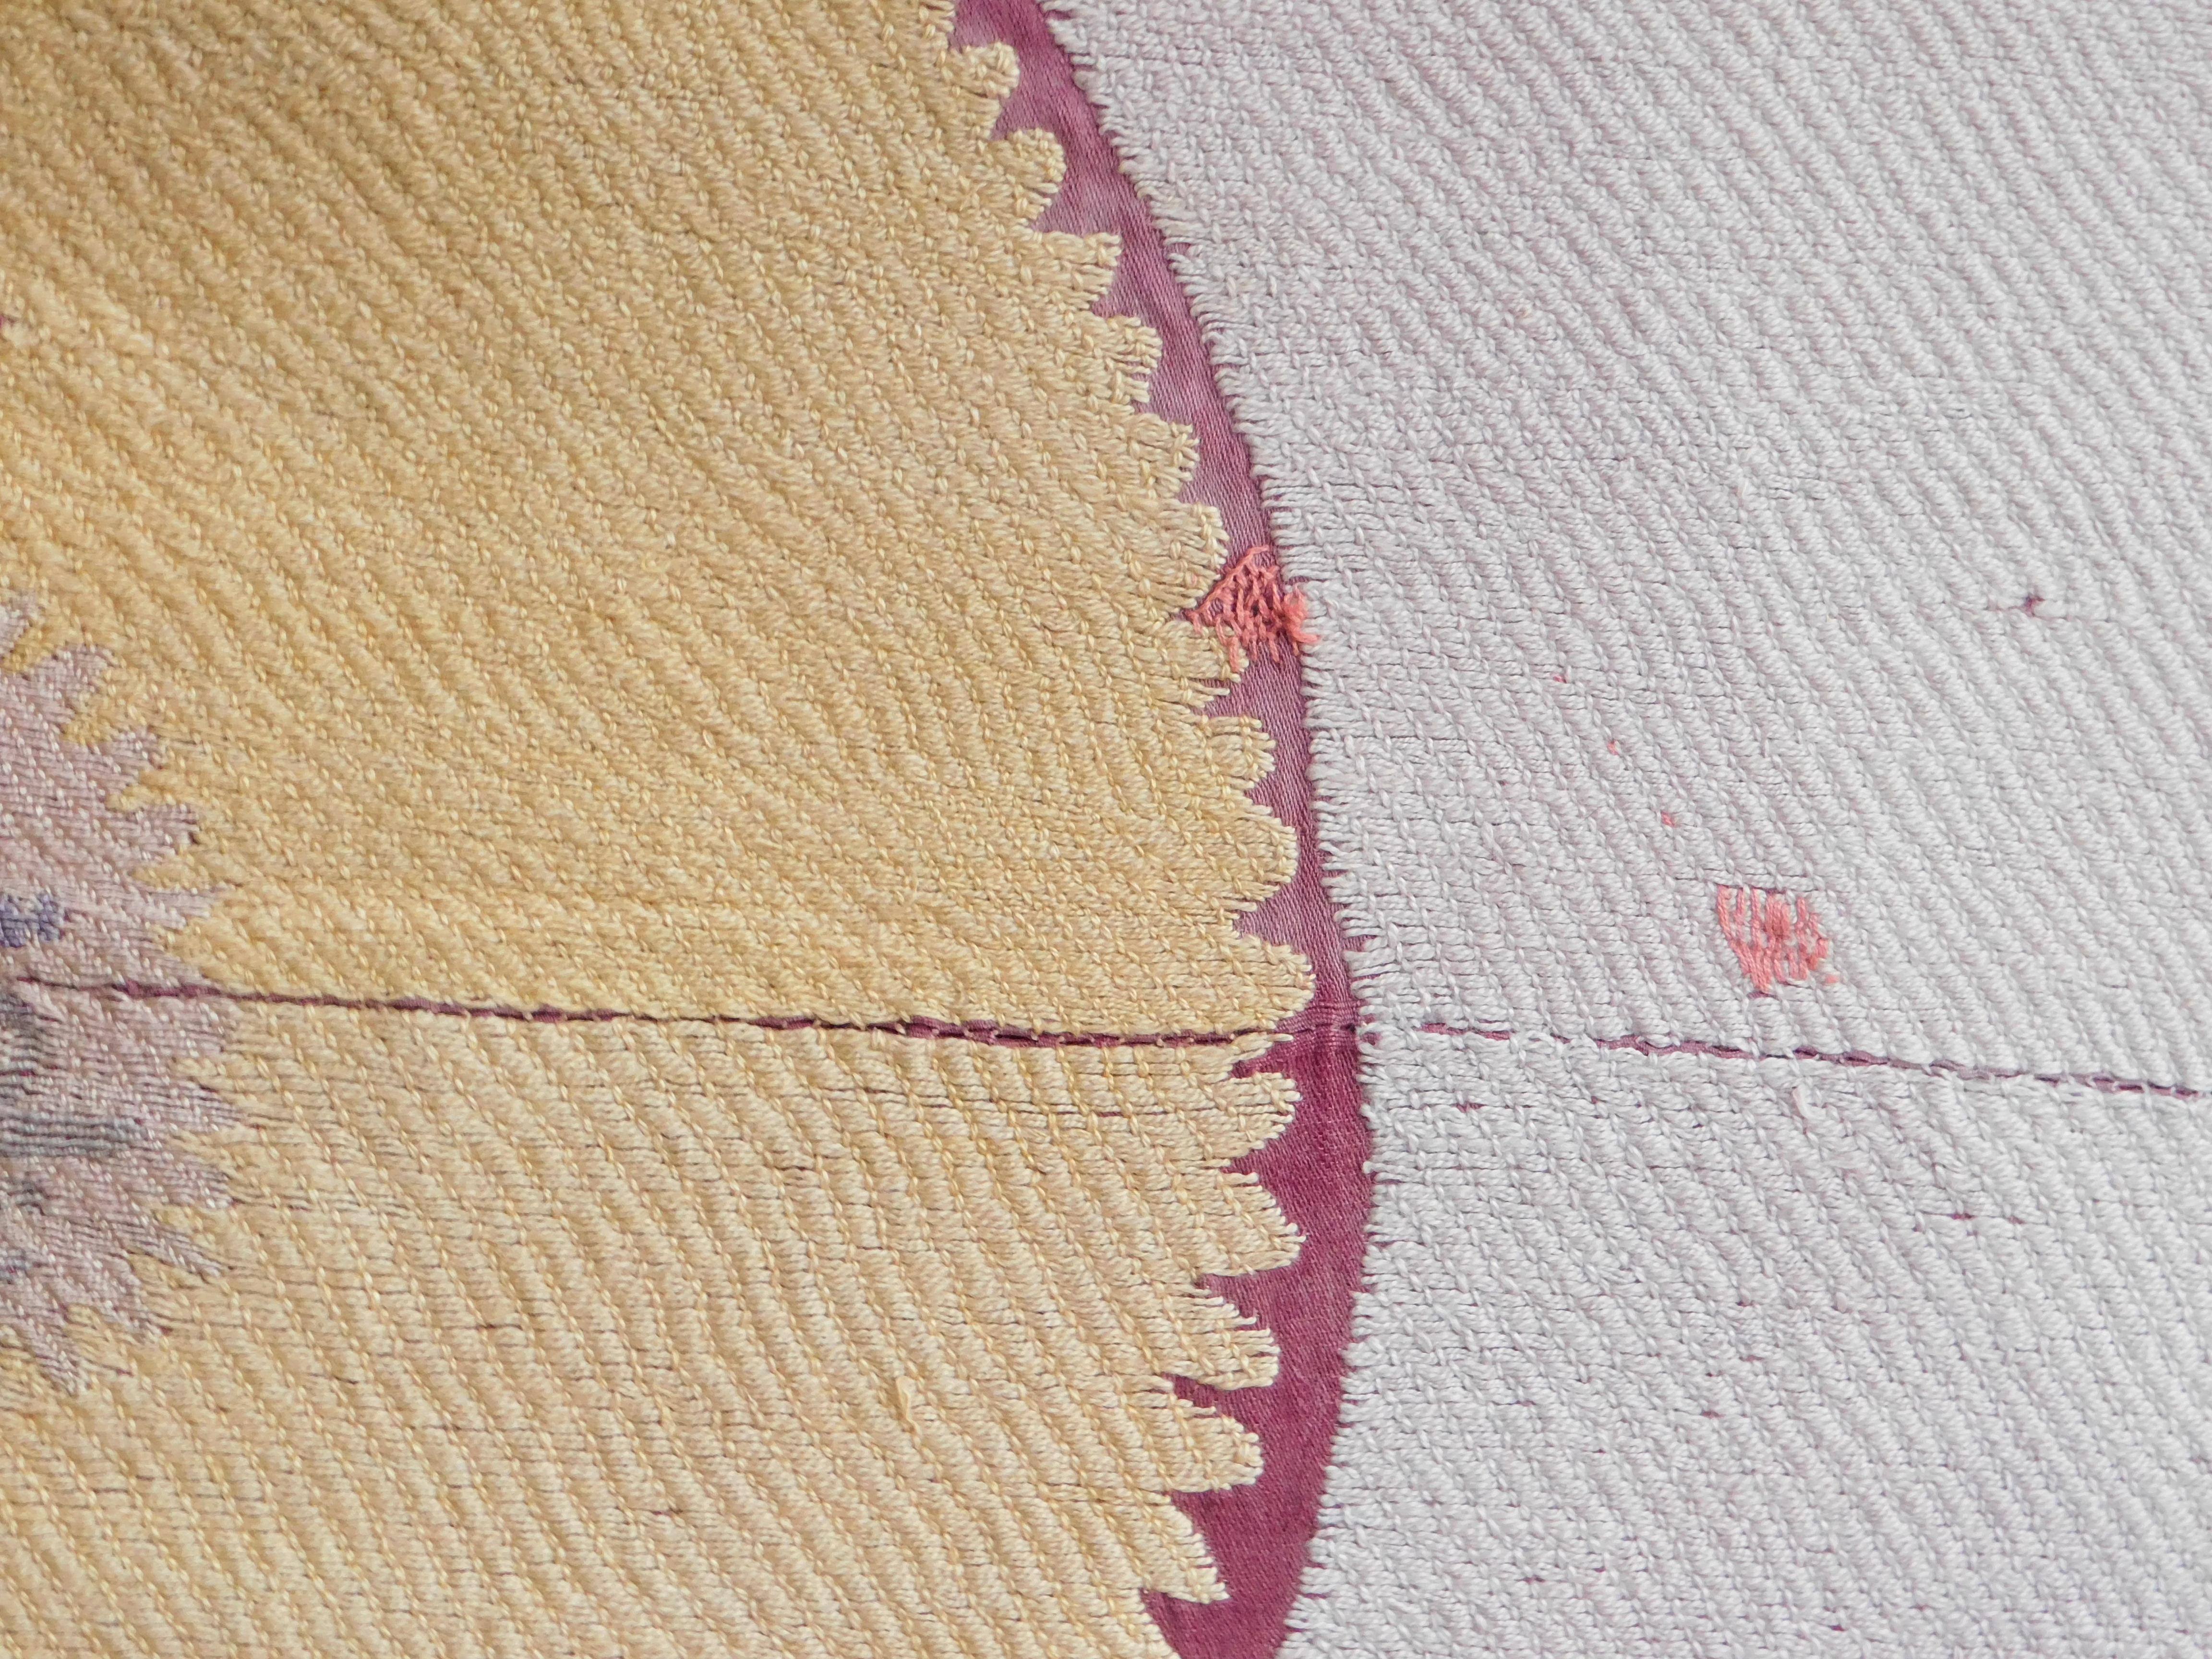  Suzani Samerand Wall Hanging Tapestry Raspberry, Peach and Lavender Embroidery im Zustand „Gut“ im Angebot in Antwerp, BE